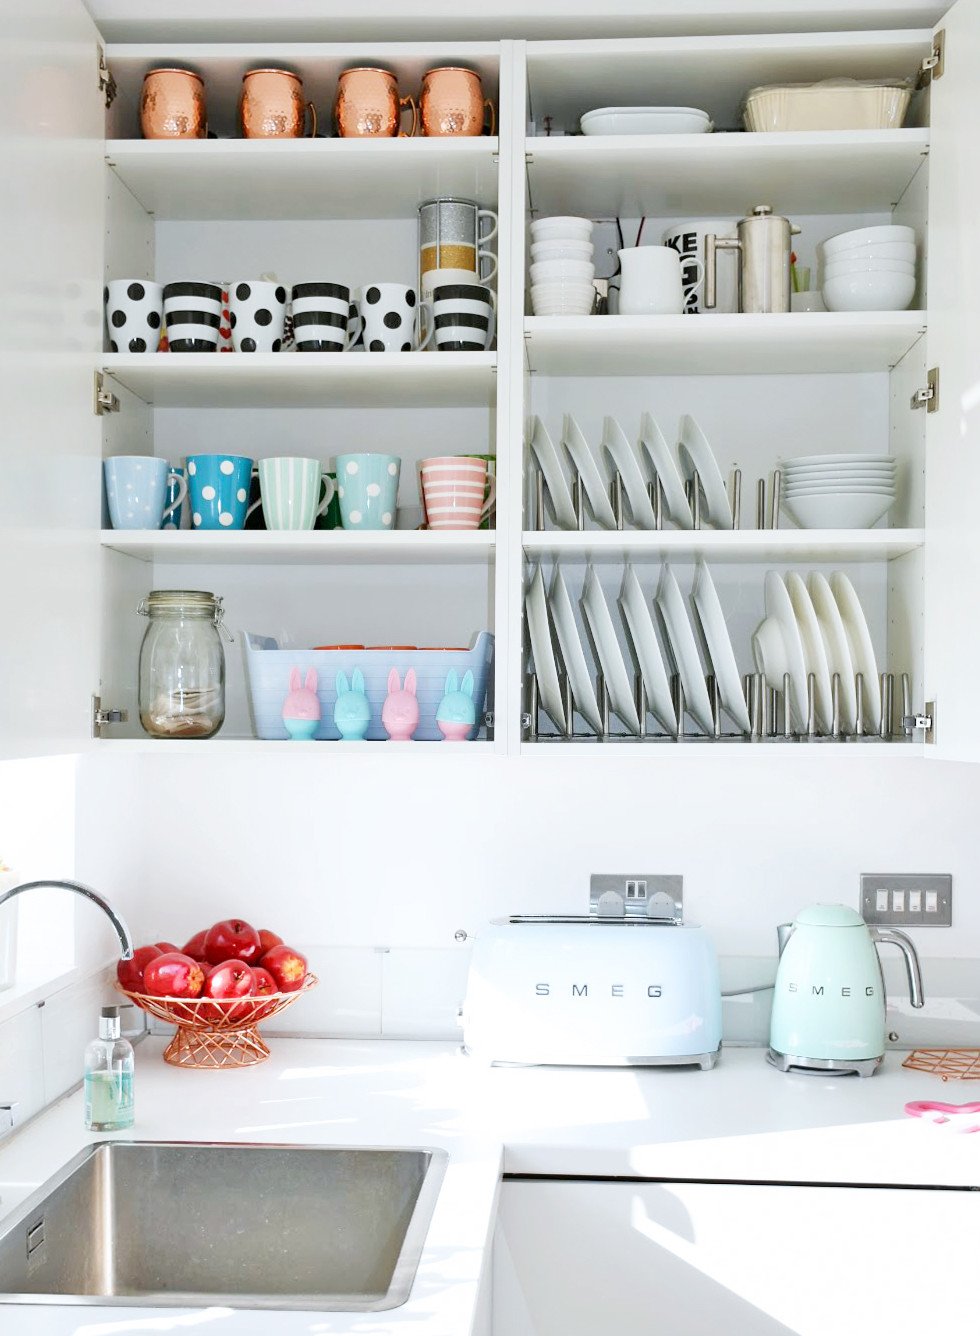 organised kitchen cupboard: mugs and plates